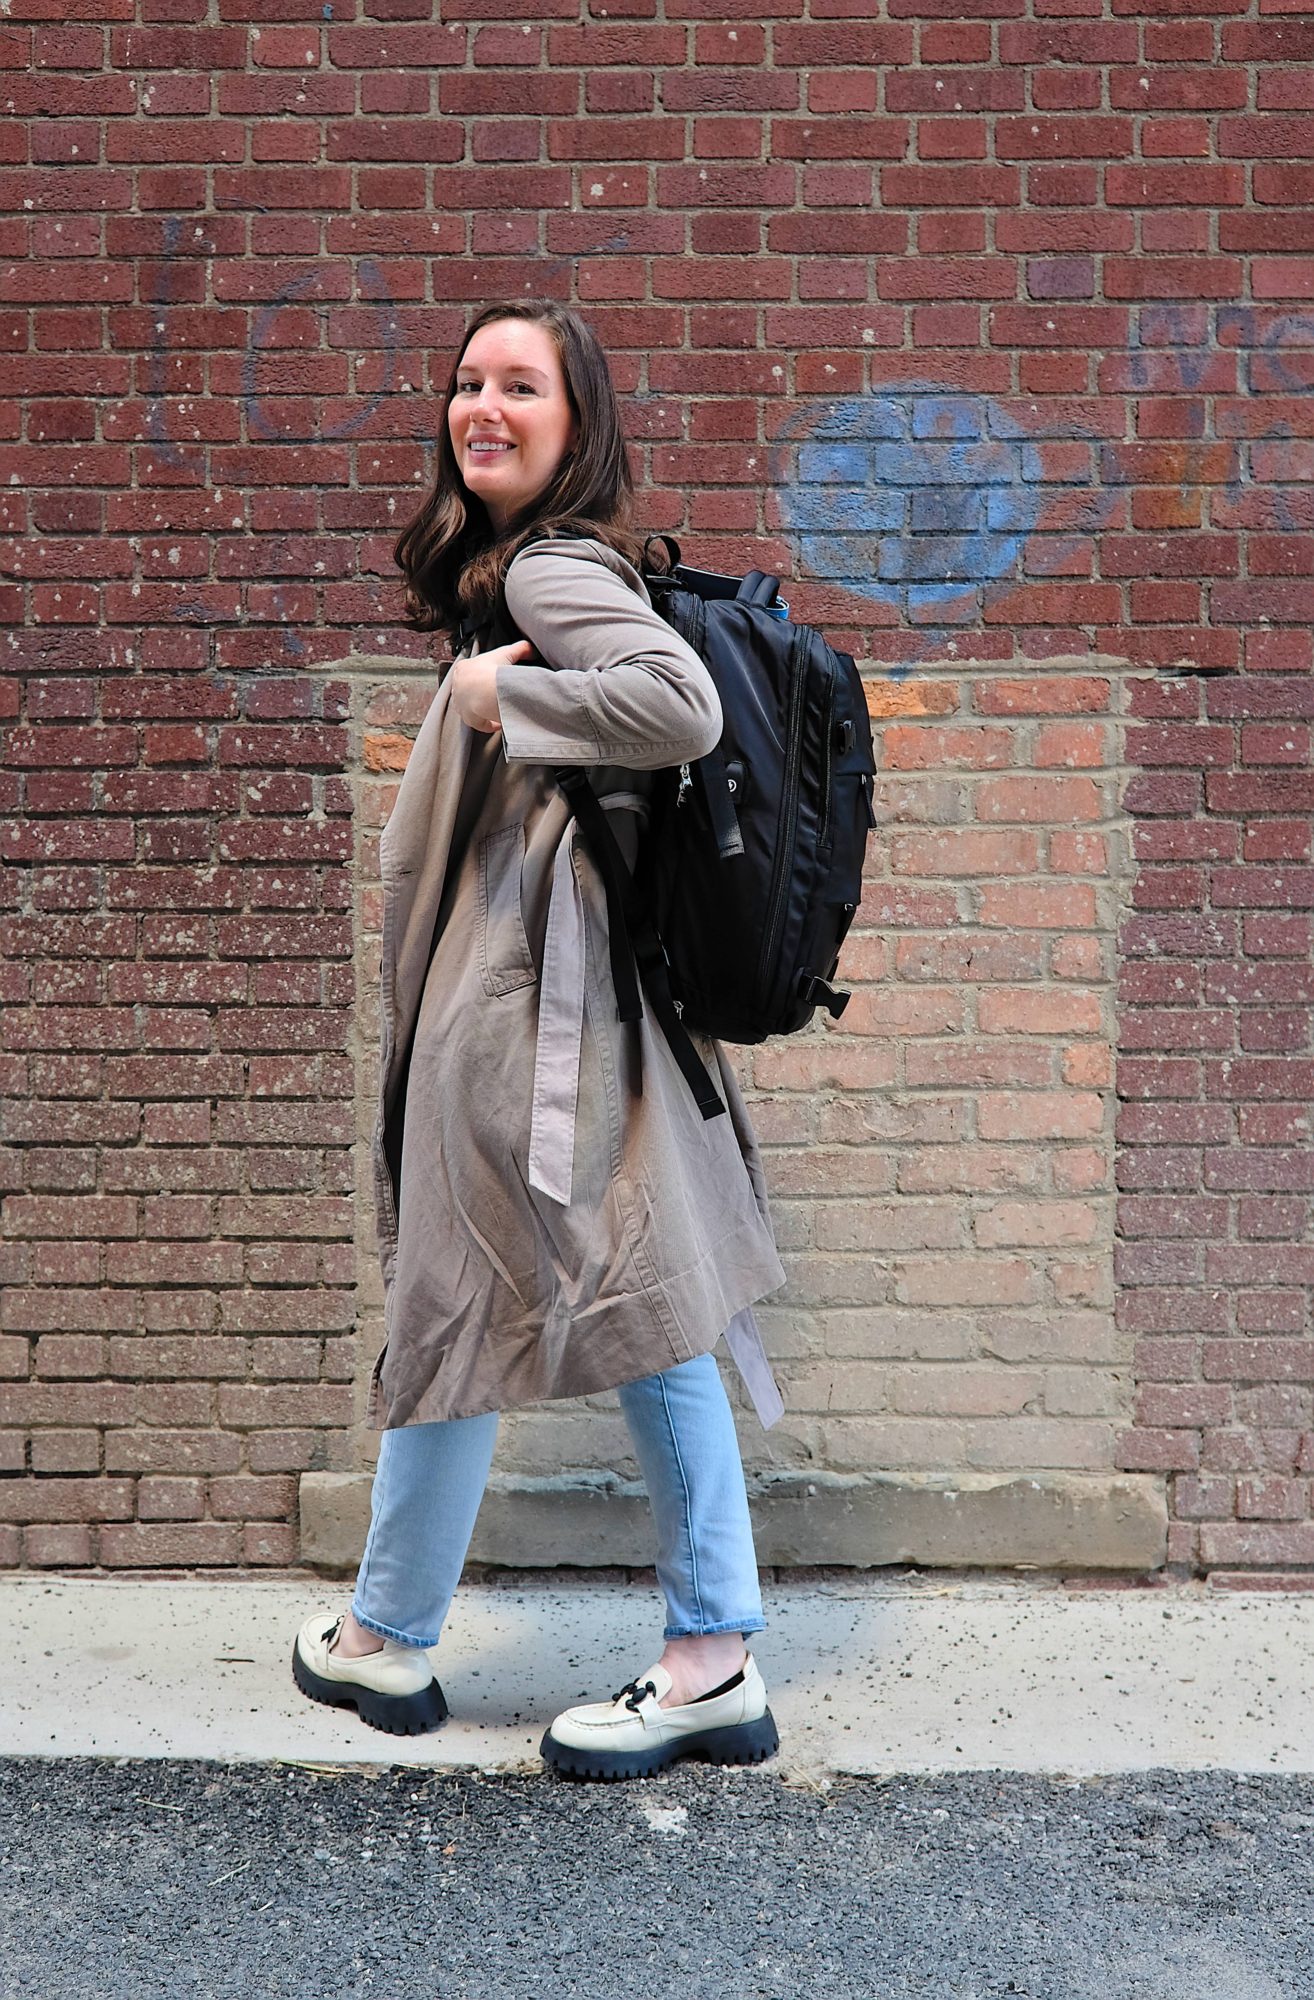 Alyssa carries a Frontier-approved backpack